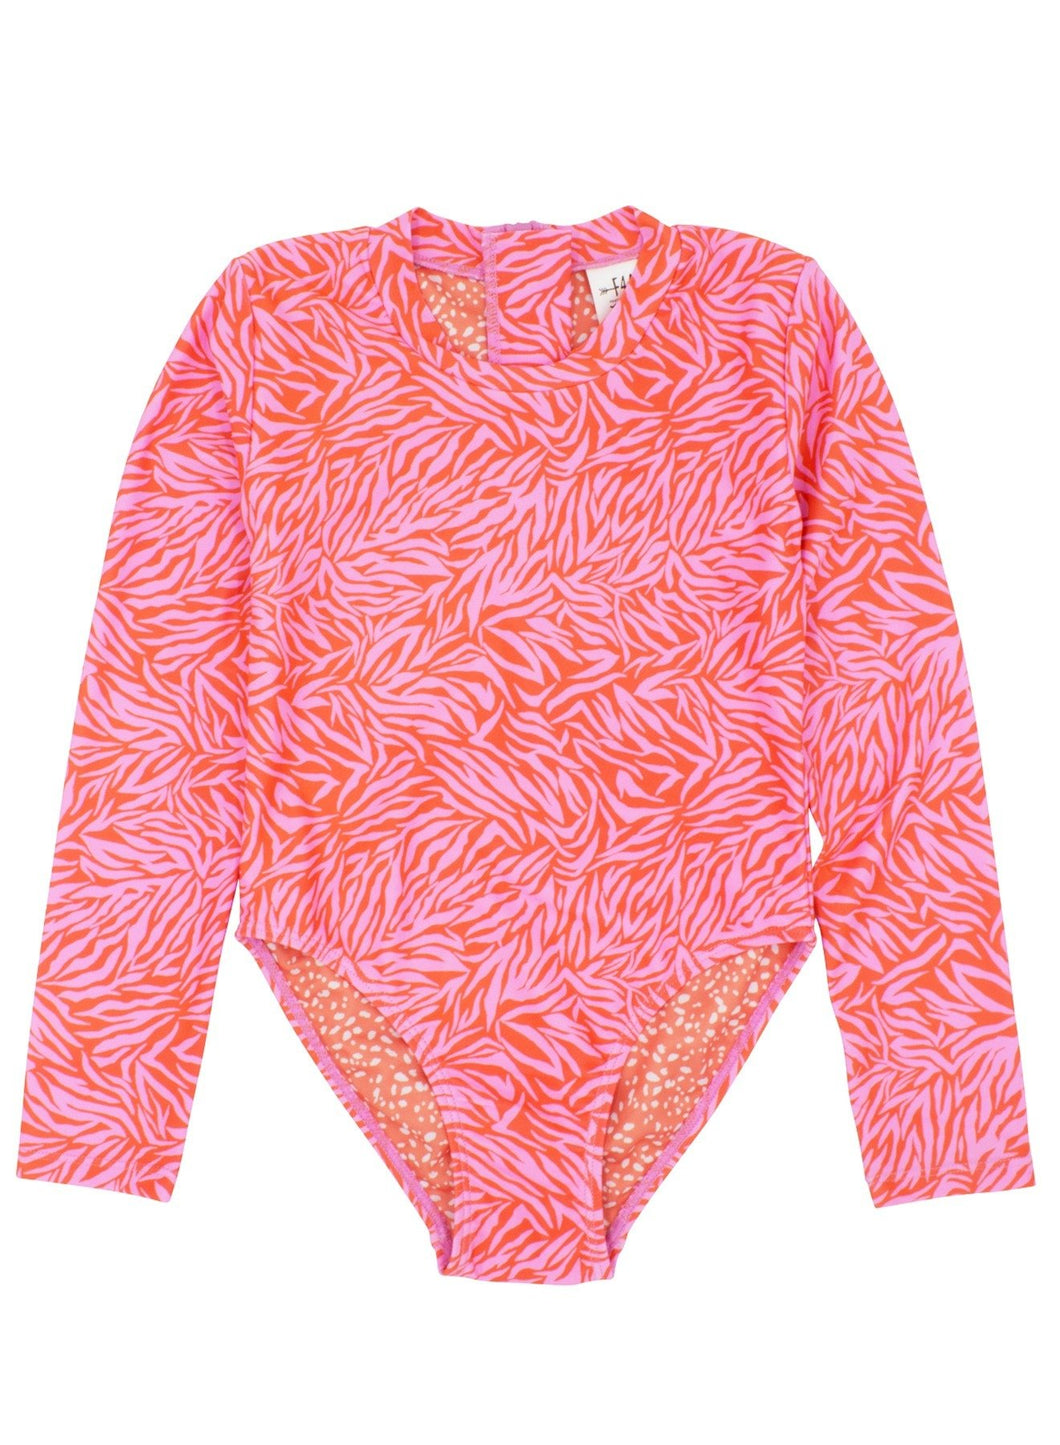 Feather 4 Arrow Wave Chaser Surf Suit LS- Coral Crush